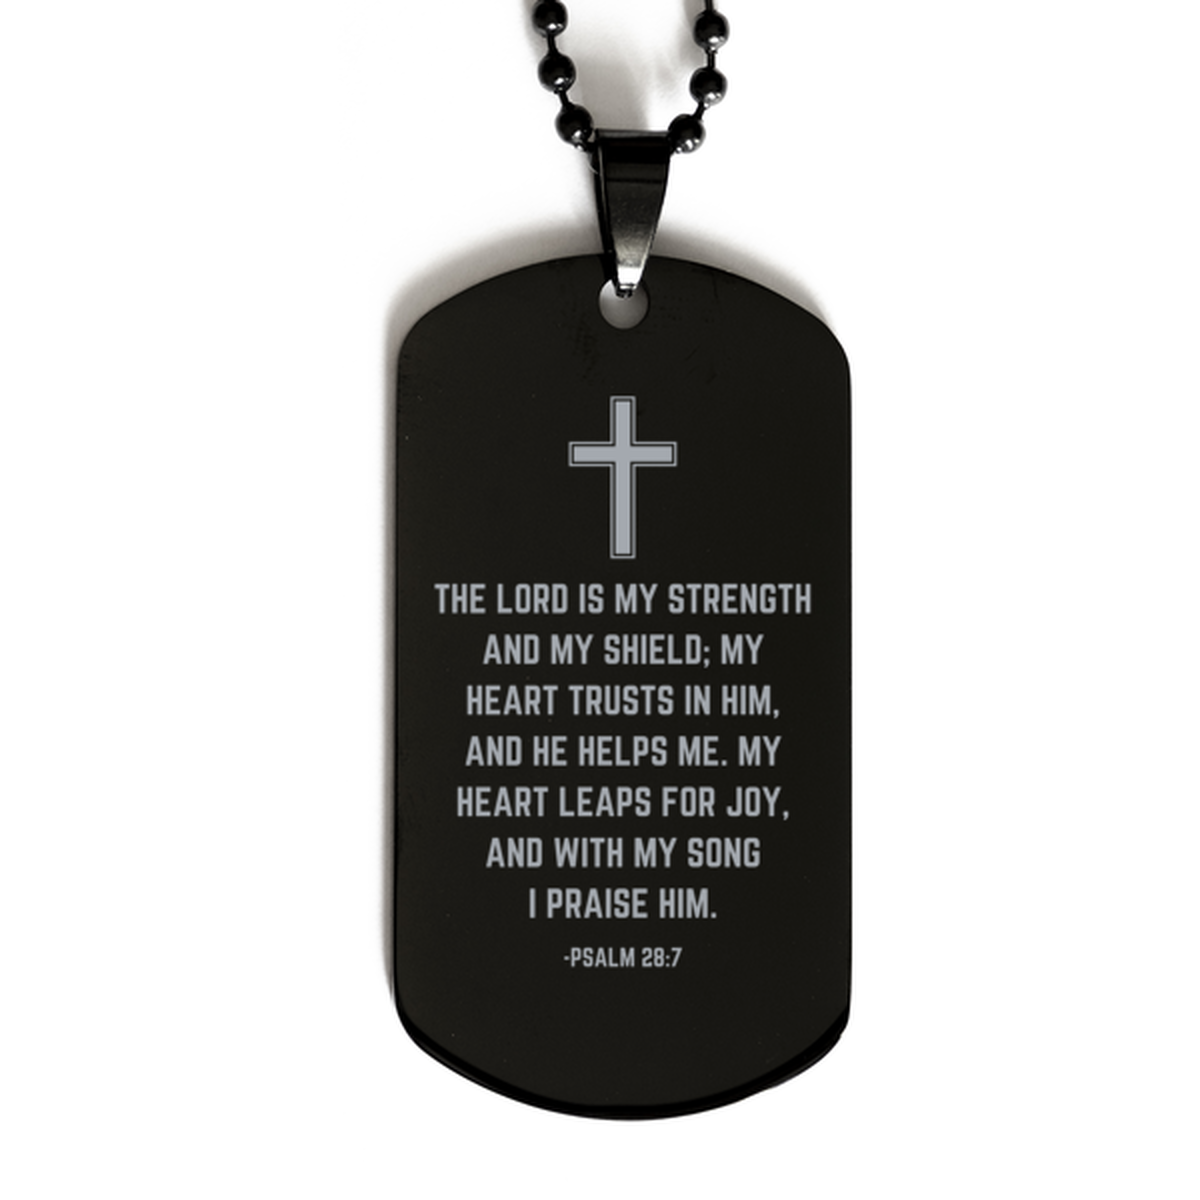 Baptism Gifts For Teenage Boys Girls, Christian Bible Verse Black Dog Tag, The Lord is my strength and my shield, Confirmation Gifts, Bible Verse Necklace for Son, Godson, Grandson, Nephew